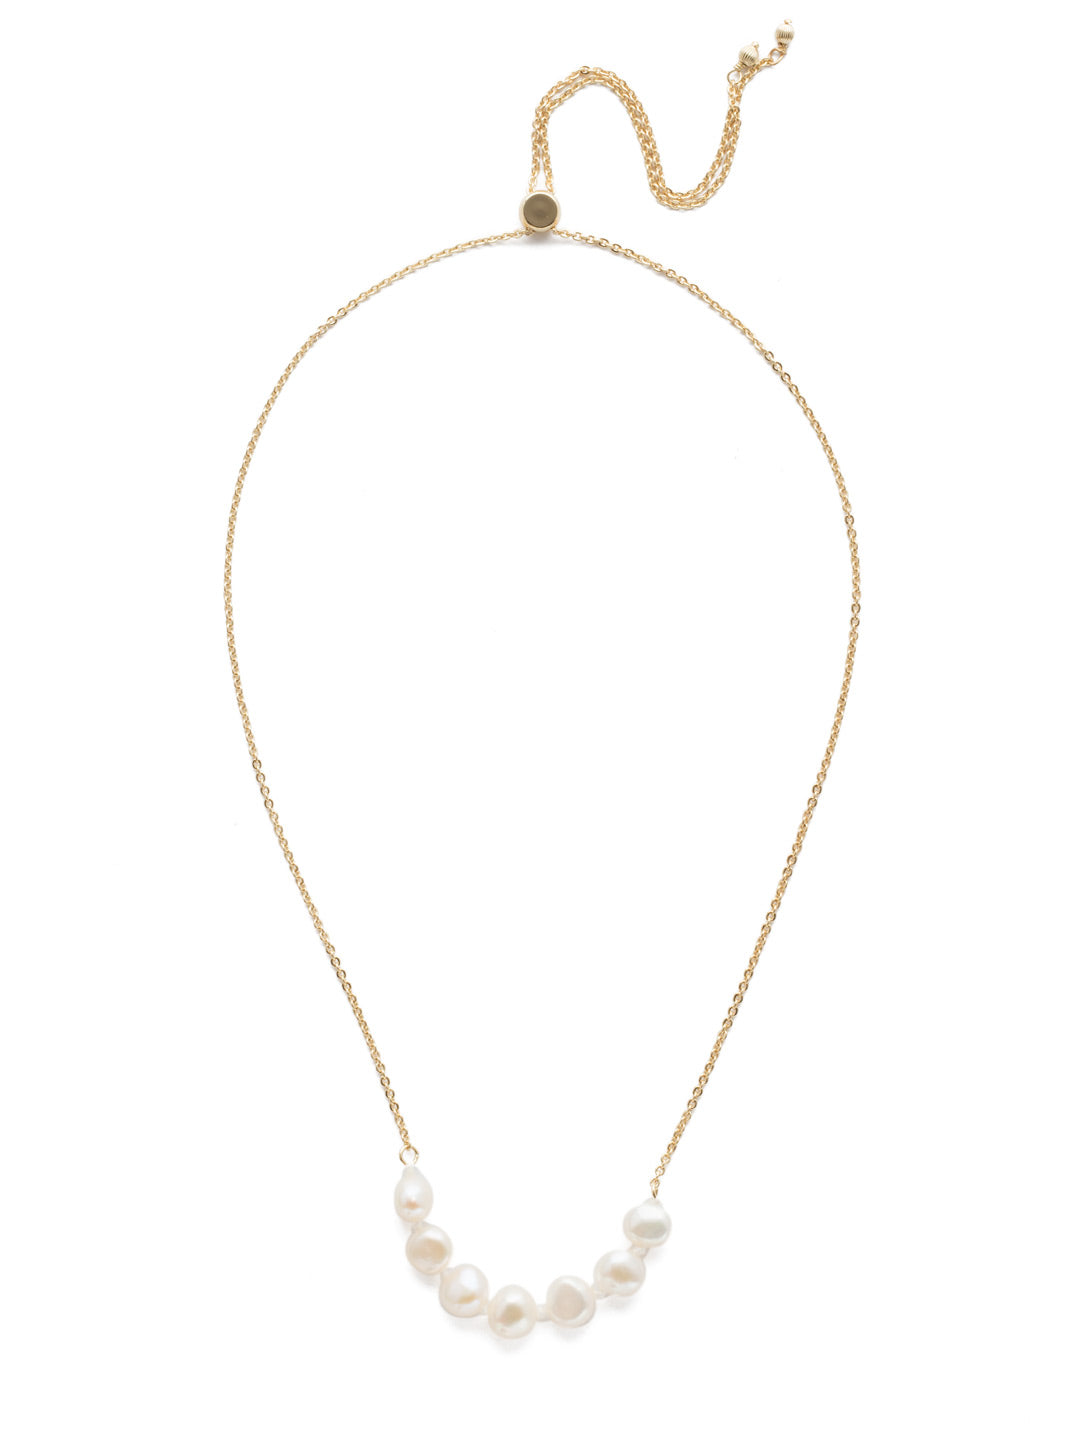 Celeste Long Necklace - 4NEF2BGMDP - <p>A delicate adjustable chain holding a cluster of classic pearls, it's sure to be the just-perfect piece you reach for again and again. From Sorrelli's Modern Pearl collection in our Bright Gold-tone finish.</p>